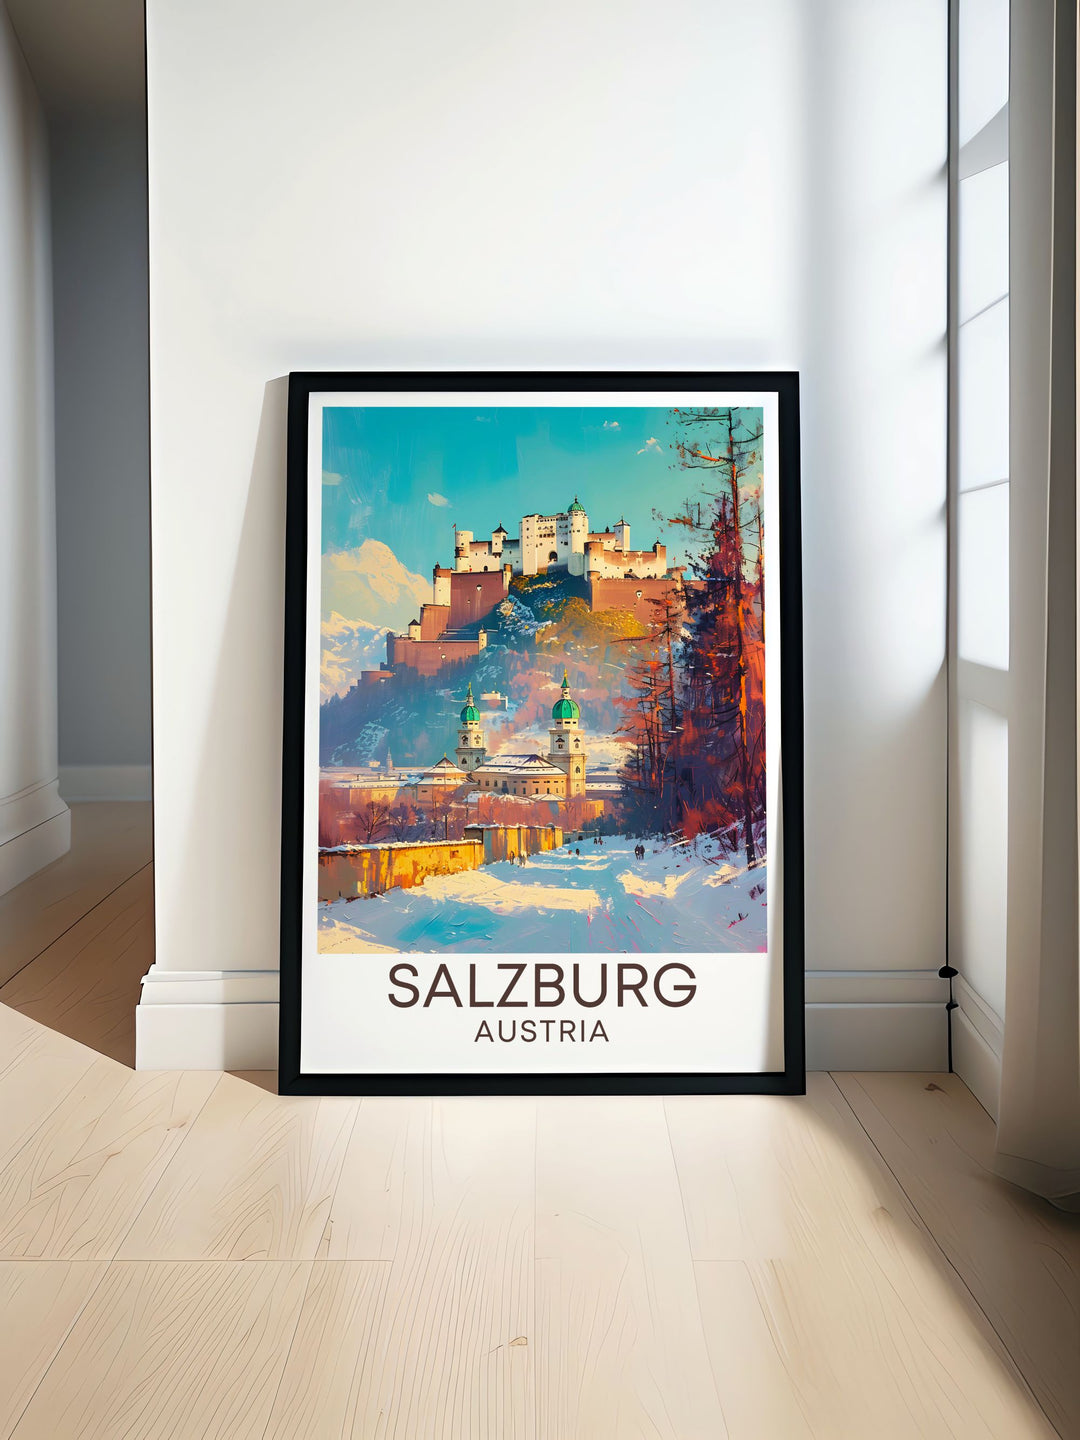 Hohensalzburg Fortress in Salzburg with Zauchensee skiing, perfect for home decor. Enhance your space with vintage travel prints featuring Austrias historic fortress and thrilling ski slopes. Ideal for travel enthusiasts and skiing fans seeking unique wall art.